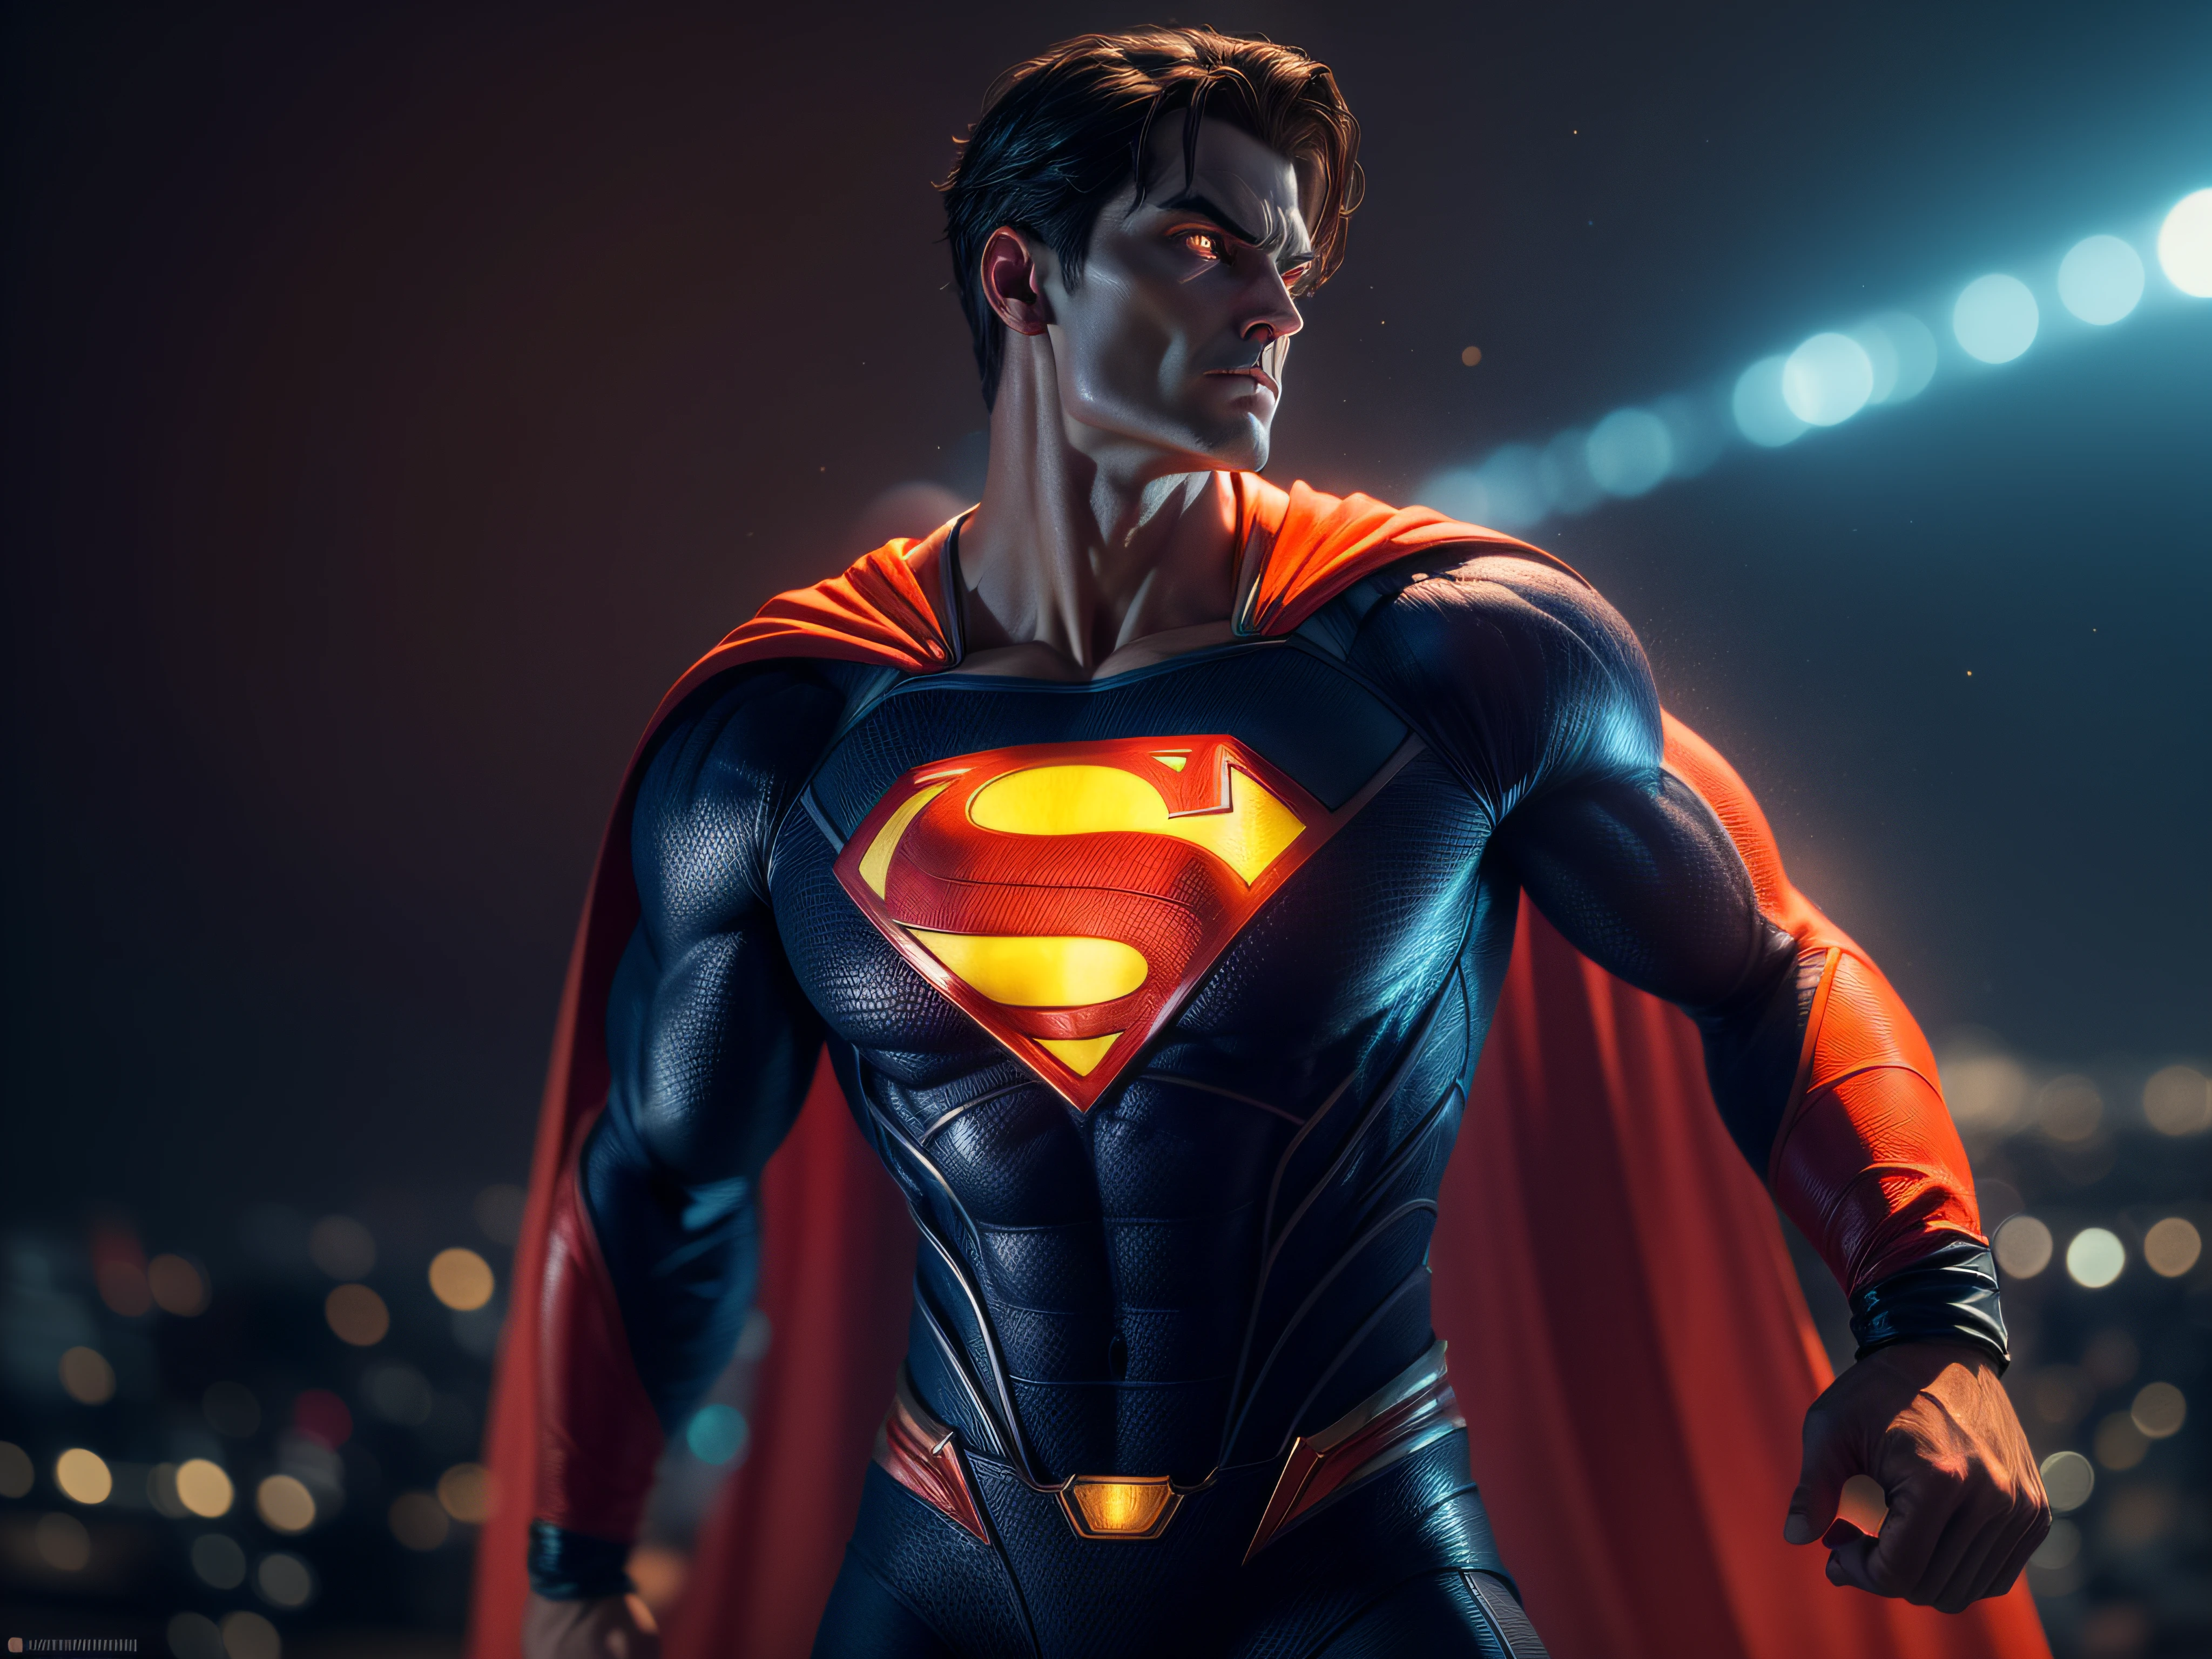 Close a powerful threat, The imposing appearance of the powerful Superman dressed in orange uniform, menacing stare, ricamente detalhado, Hiper realista, 3D-rendering, obra-prima, NVIDIA, RTX, ray-traced, Bokeh, Night sky with a huge and beautiful full moon, estrelas brilhando, 8k,